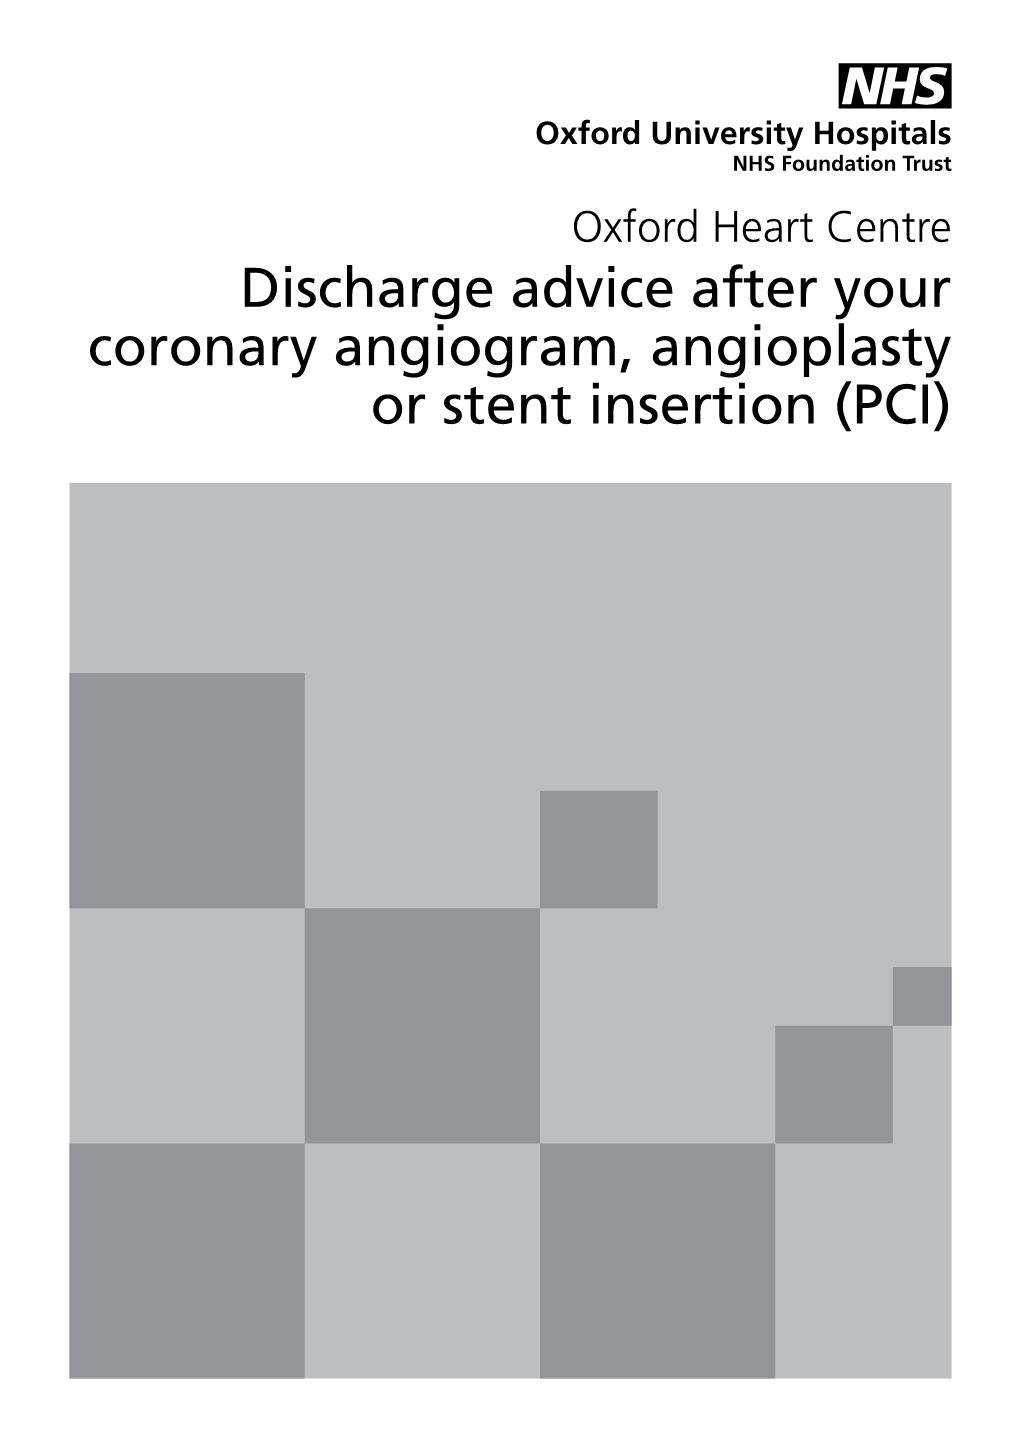 Discharge Advice After Your Coronary Angiogram, Angioplasty Or Stent Insertion (PCI)